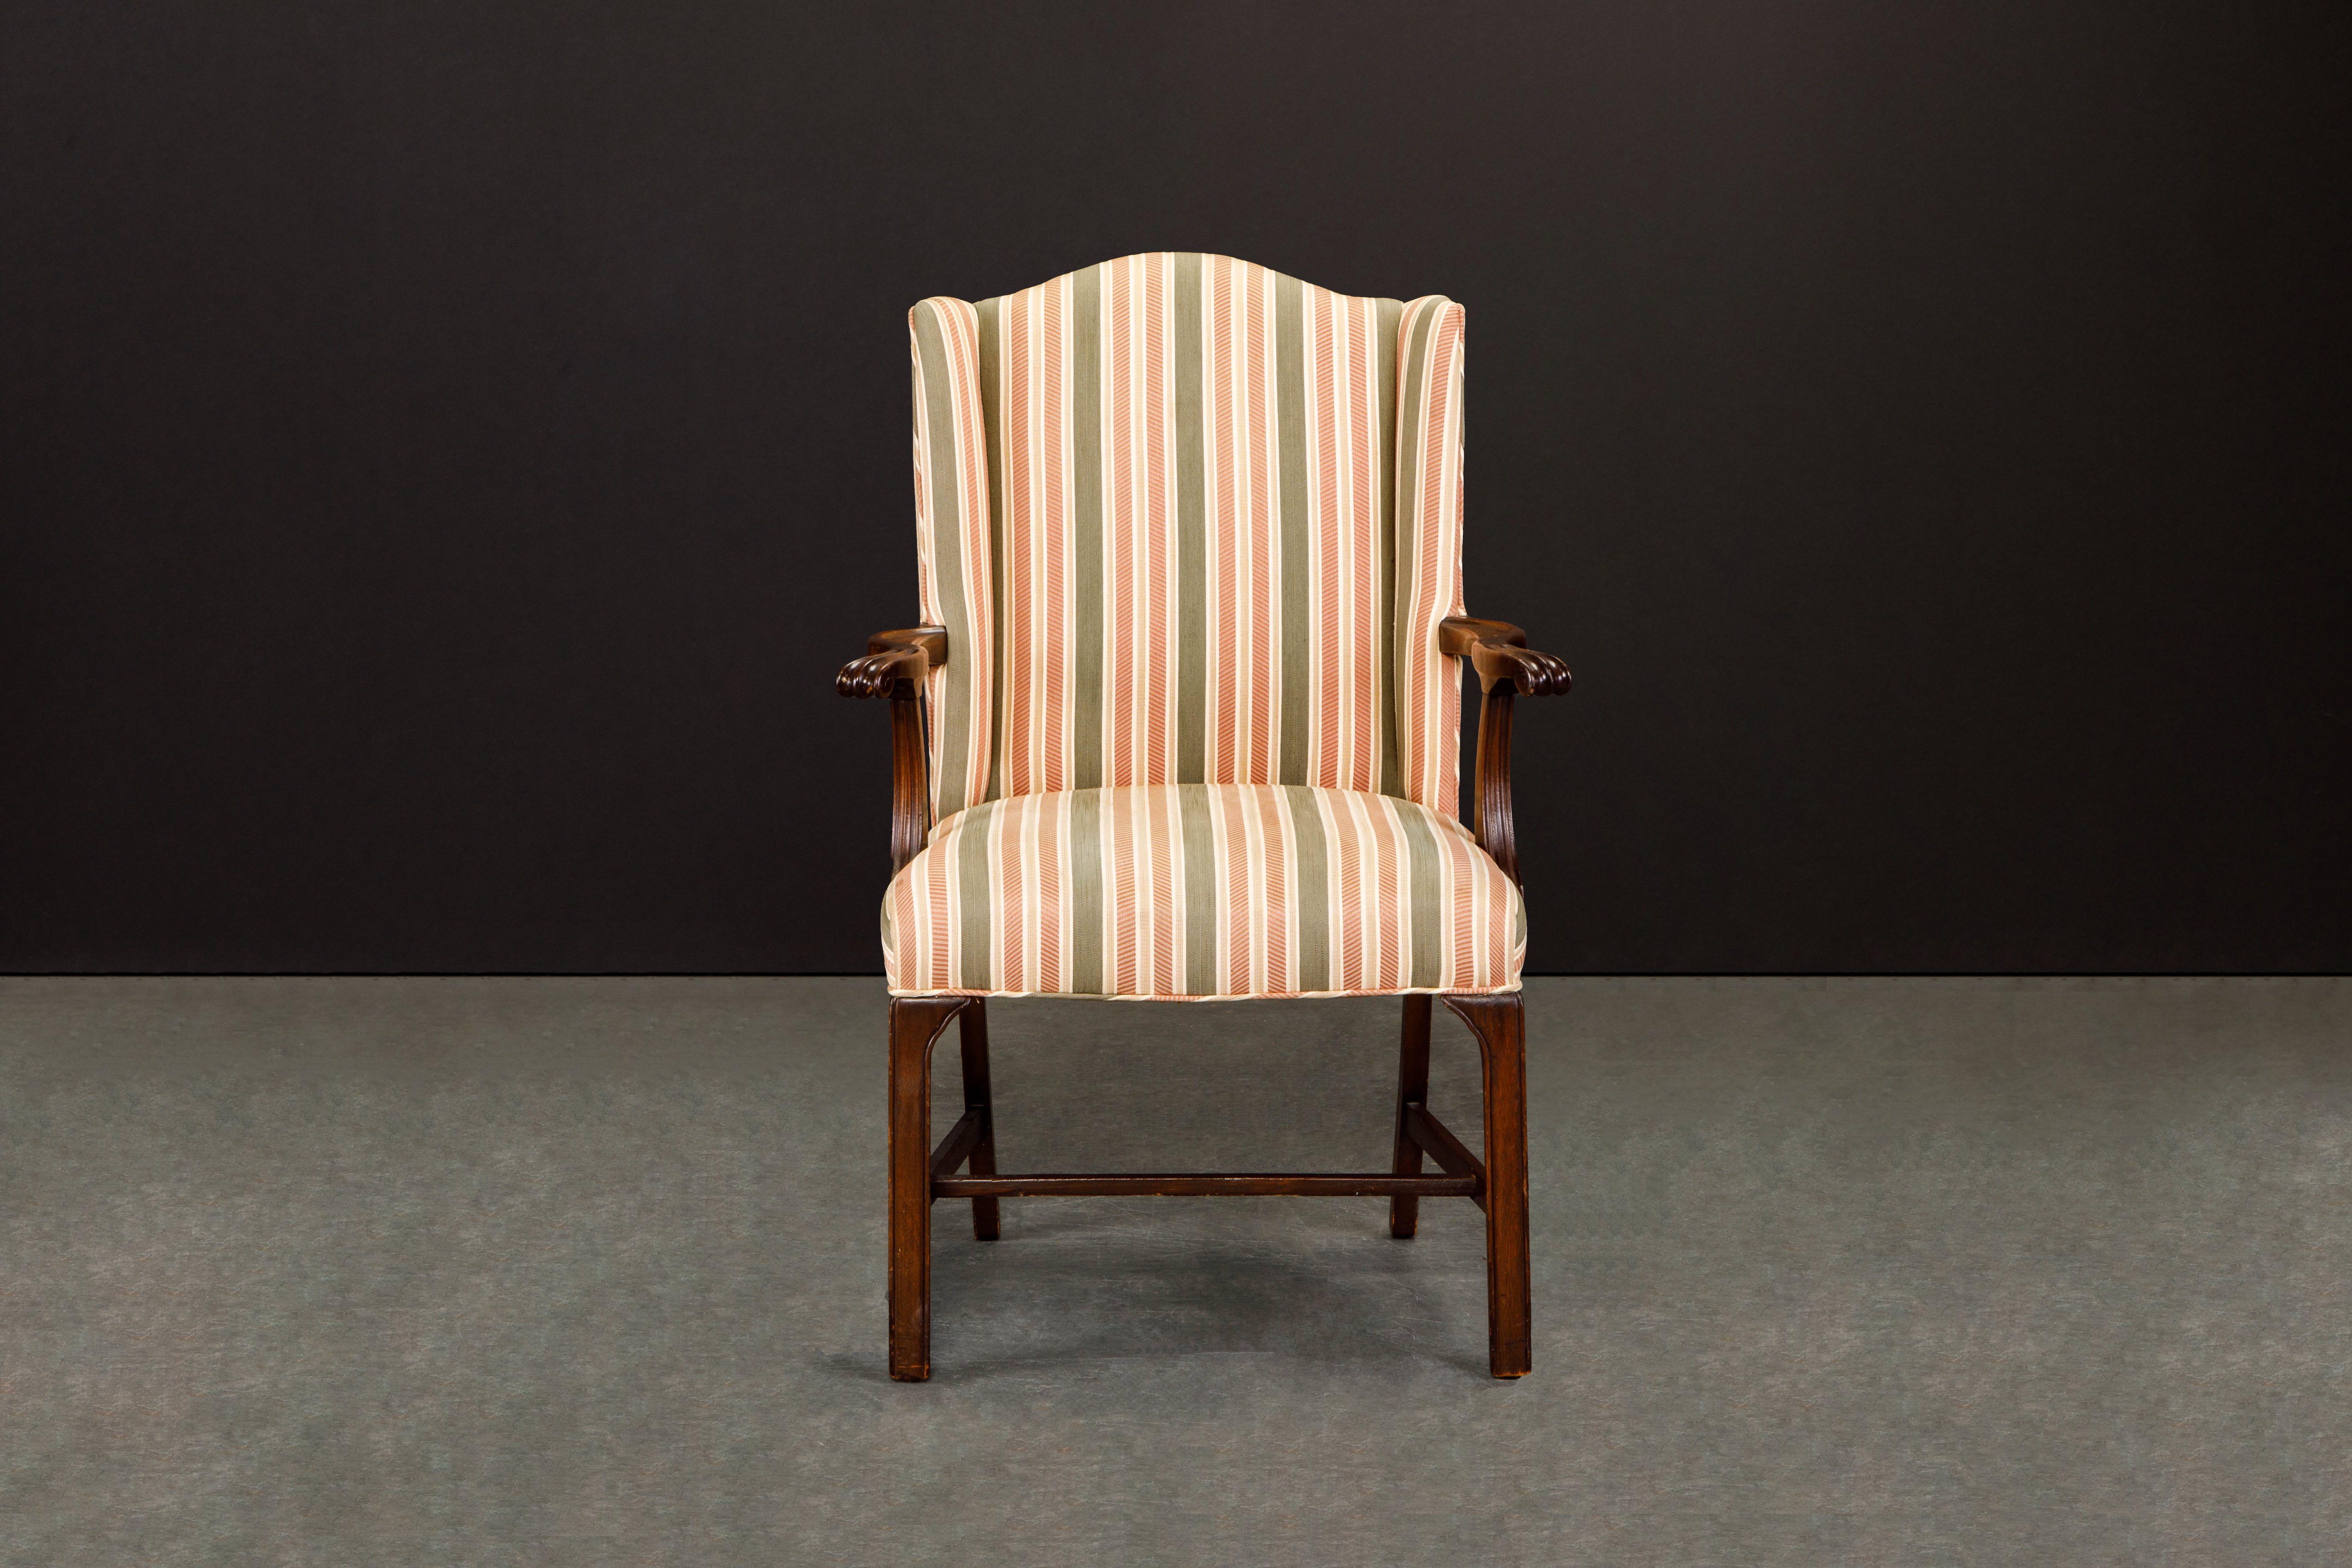 This beautiful Gainsborough style armchair with gorgeous carved wood arms are upholstered in a lovely striped fabric consisting of pinks, golds, green and off-white, featuring a subtle wingback design and in the Chippendale manner.

This antique